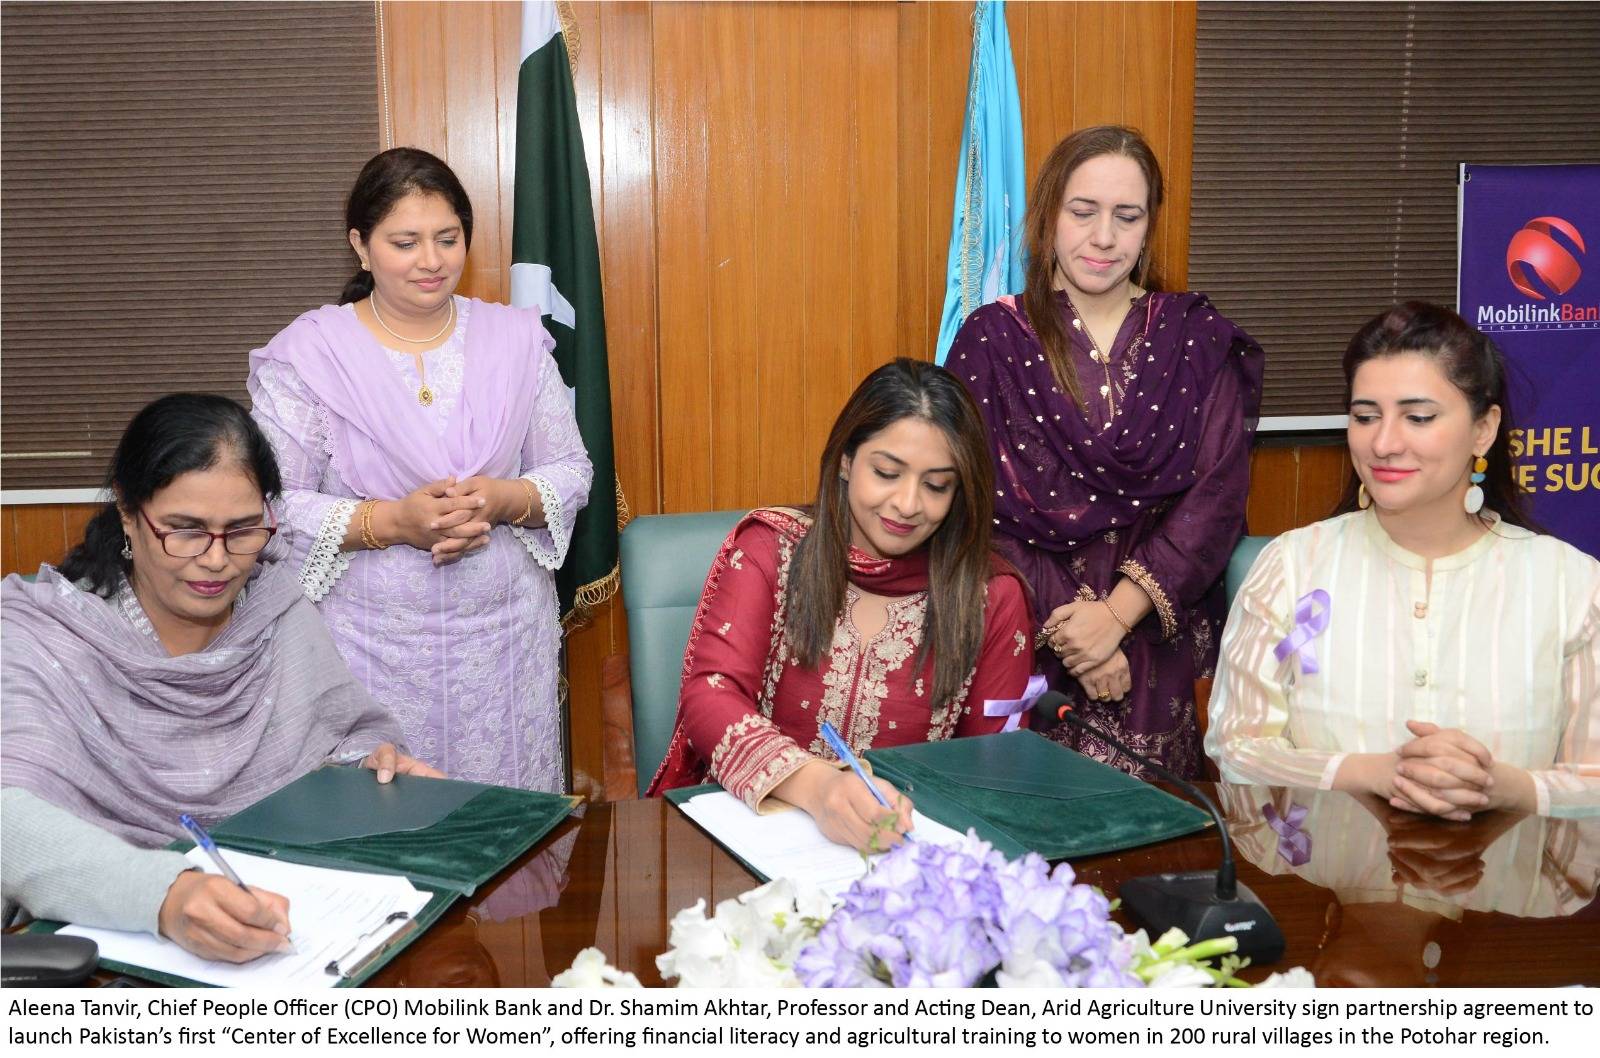 Mobilink Bank Partners with Arid University to Launch “Center of Excellence for Women” Promoting Financial Inclusion